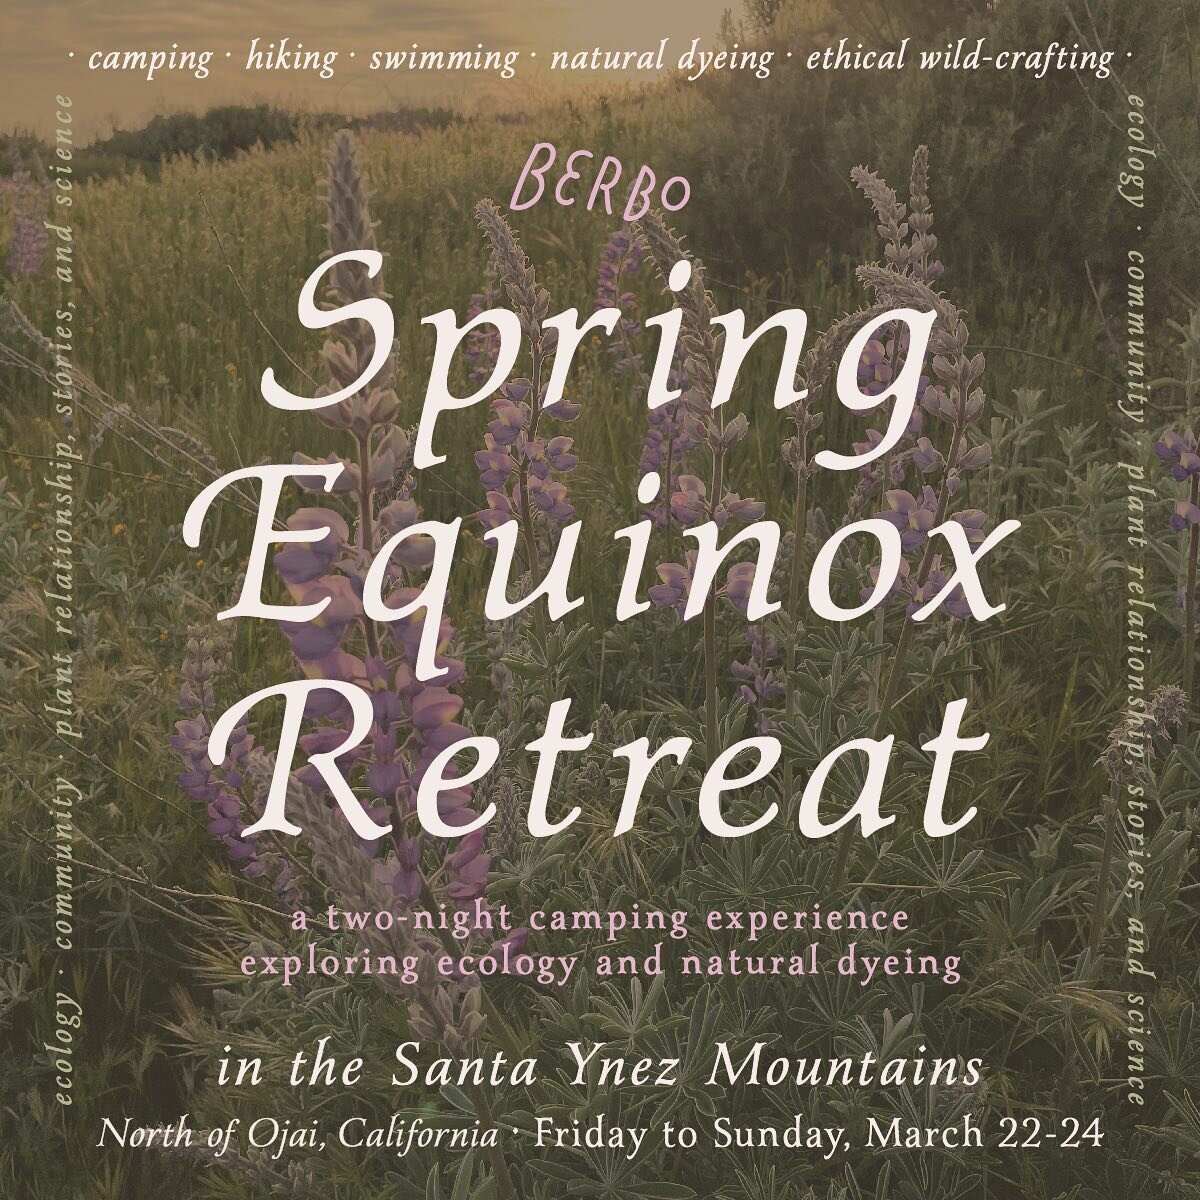 Join me on the first weekend of spring, March 22-24, for two nights of camping in the shelter of an oak grove beside a rambling creek in the beautiful Santa Ynez Mountains north of Ojai.

We&rsquo;ll welcome the change of season among burgeoning, vib